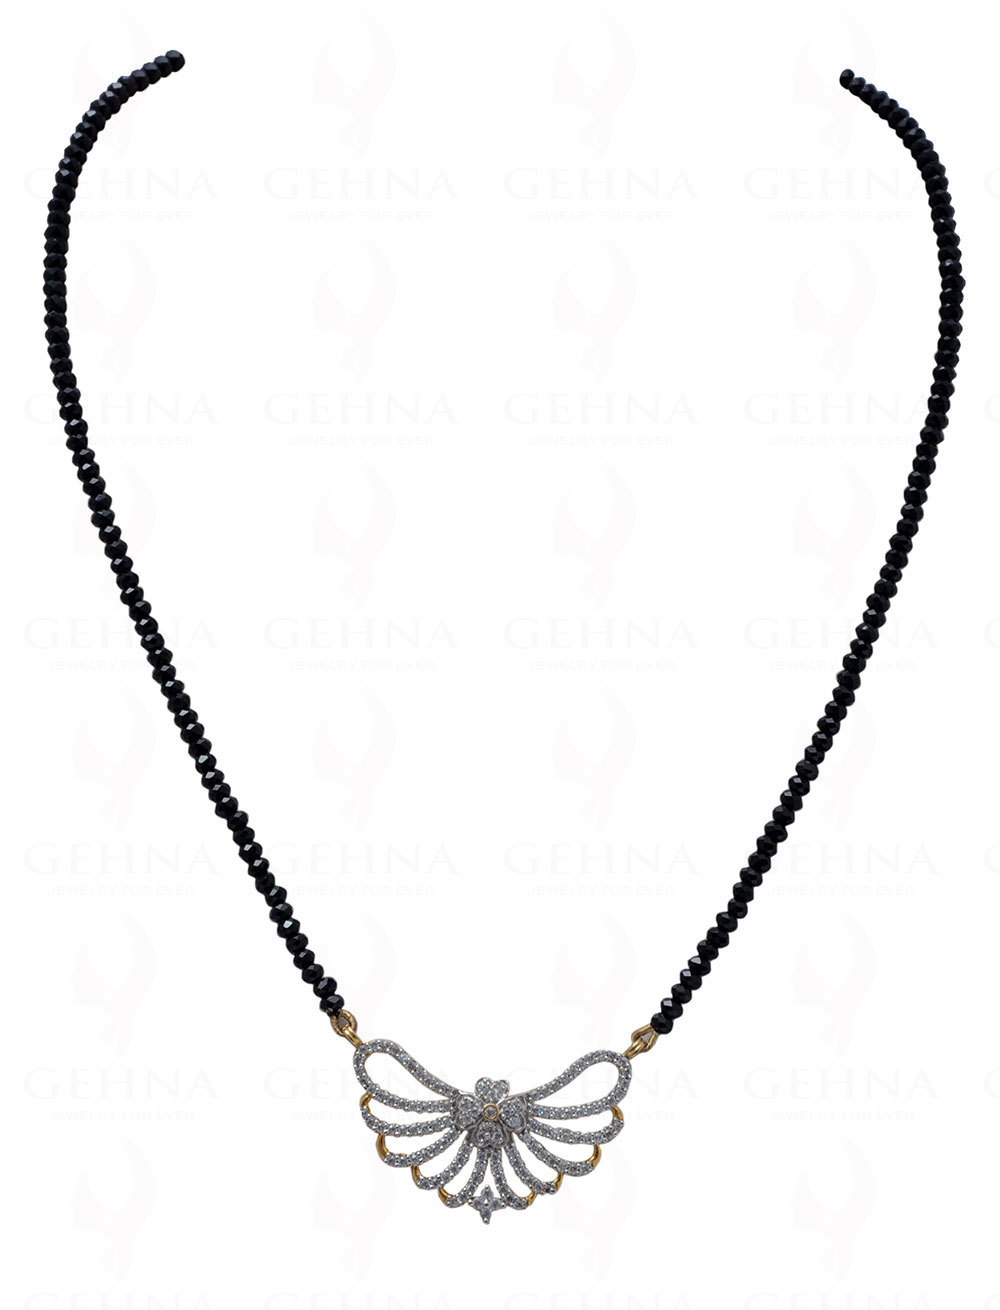 Black Spinel Gemstone Faceted Bead Necklace With Silver Pendant NS-1195